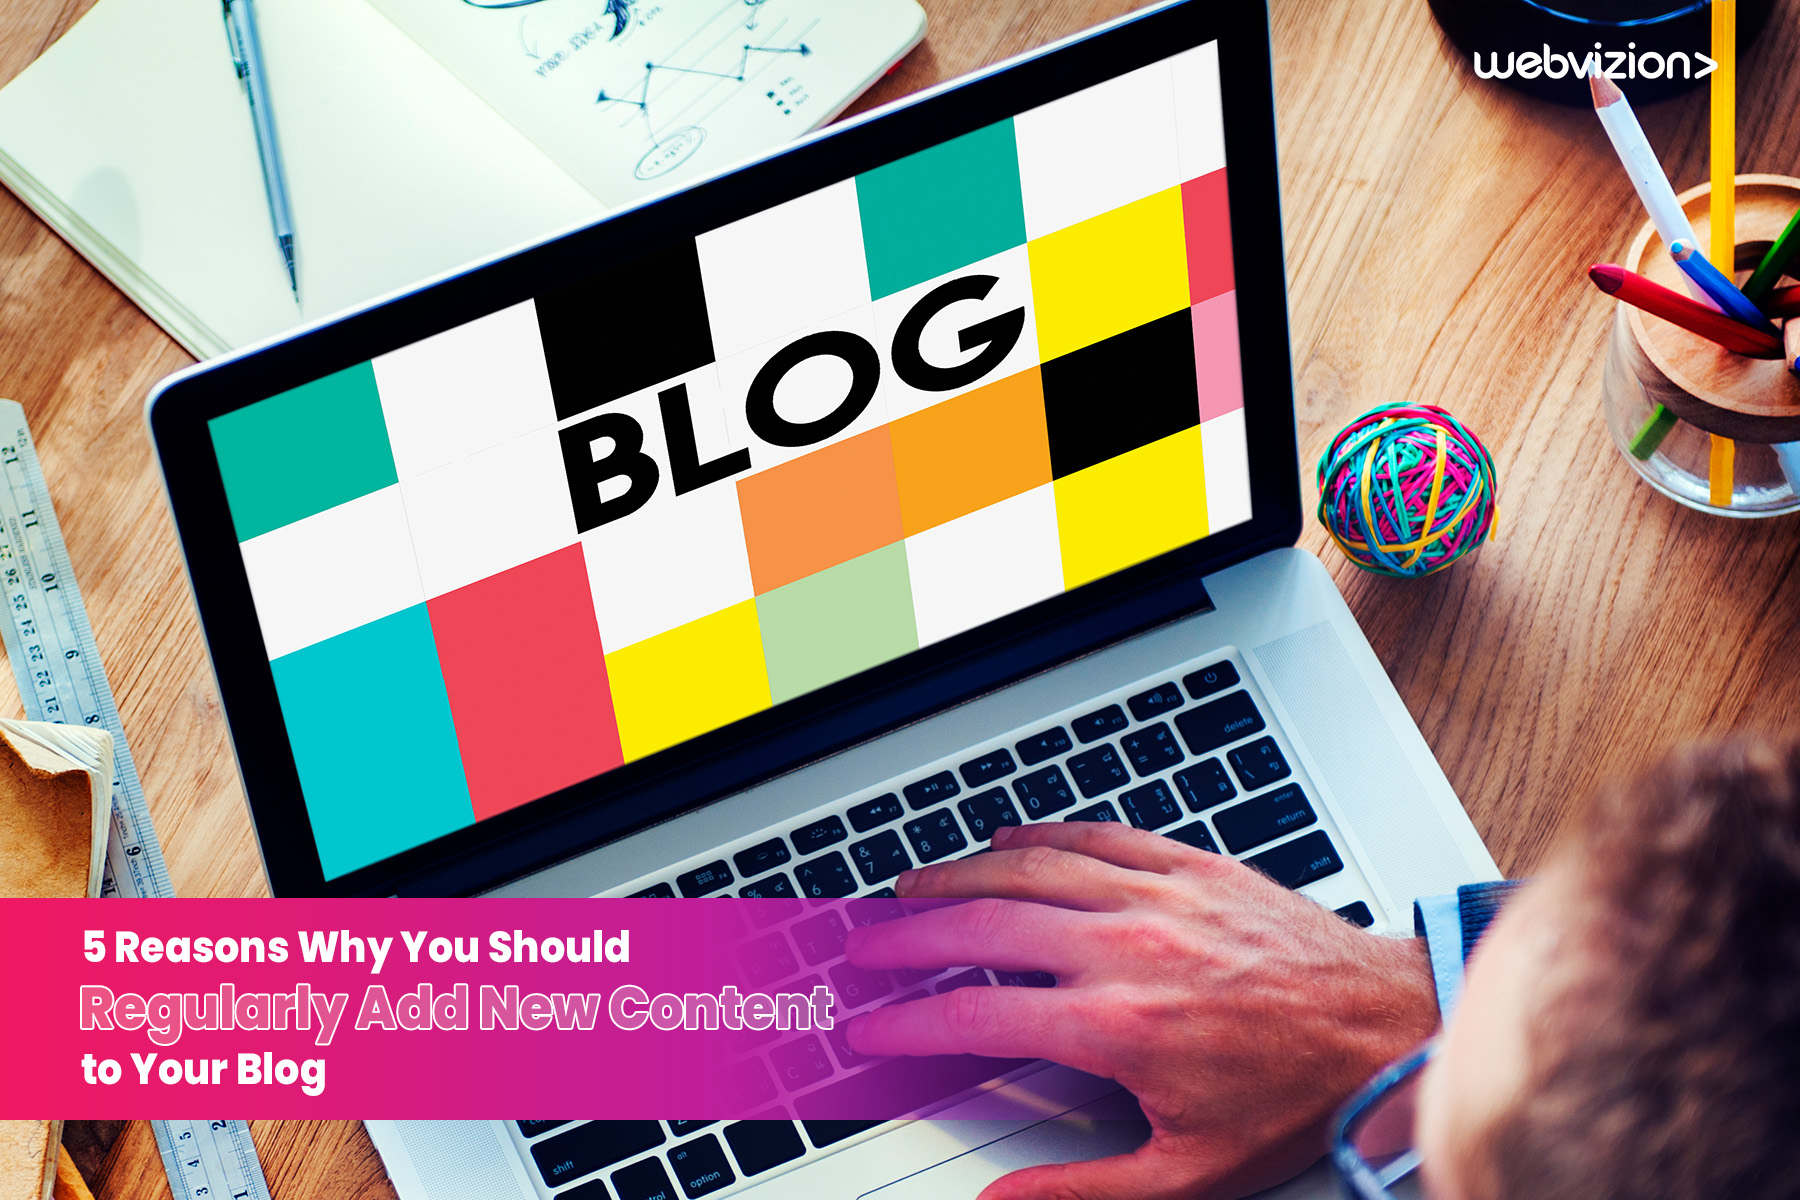 5 Reasons Why You Should Regularly Add New Content to Your Blog